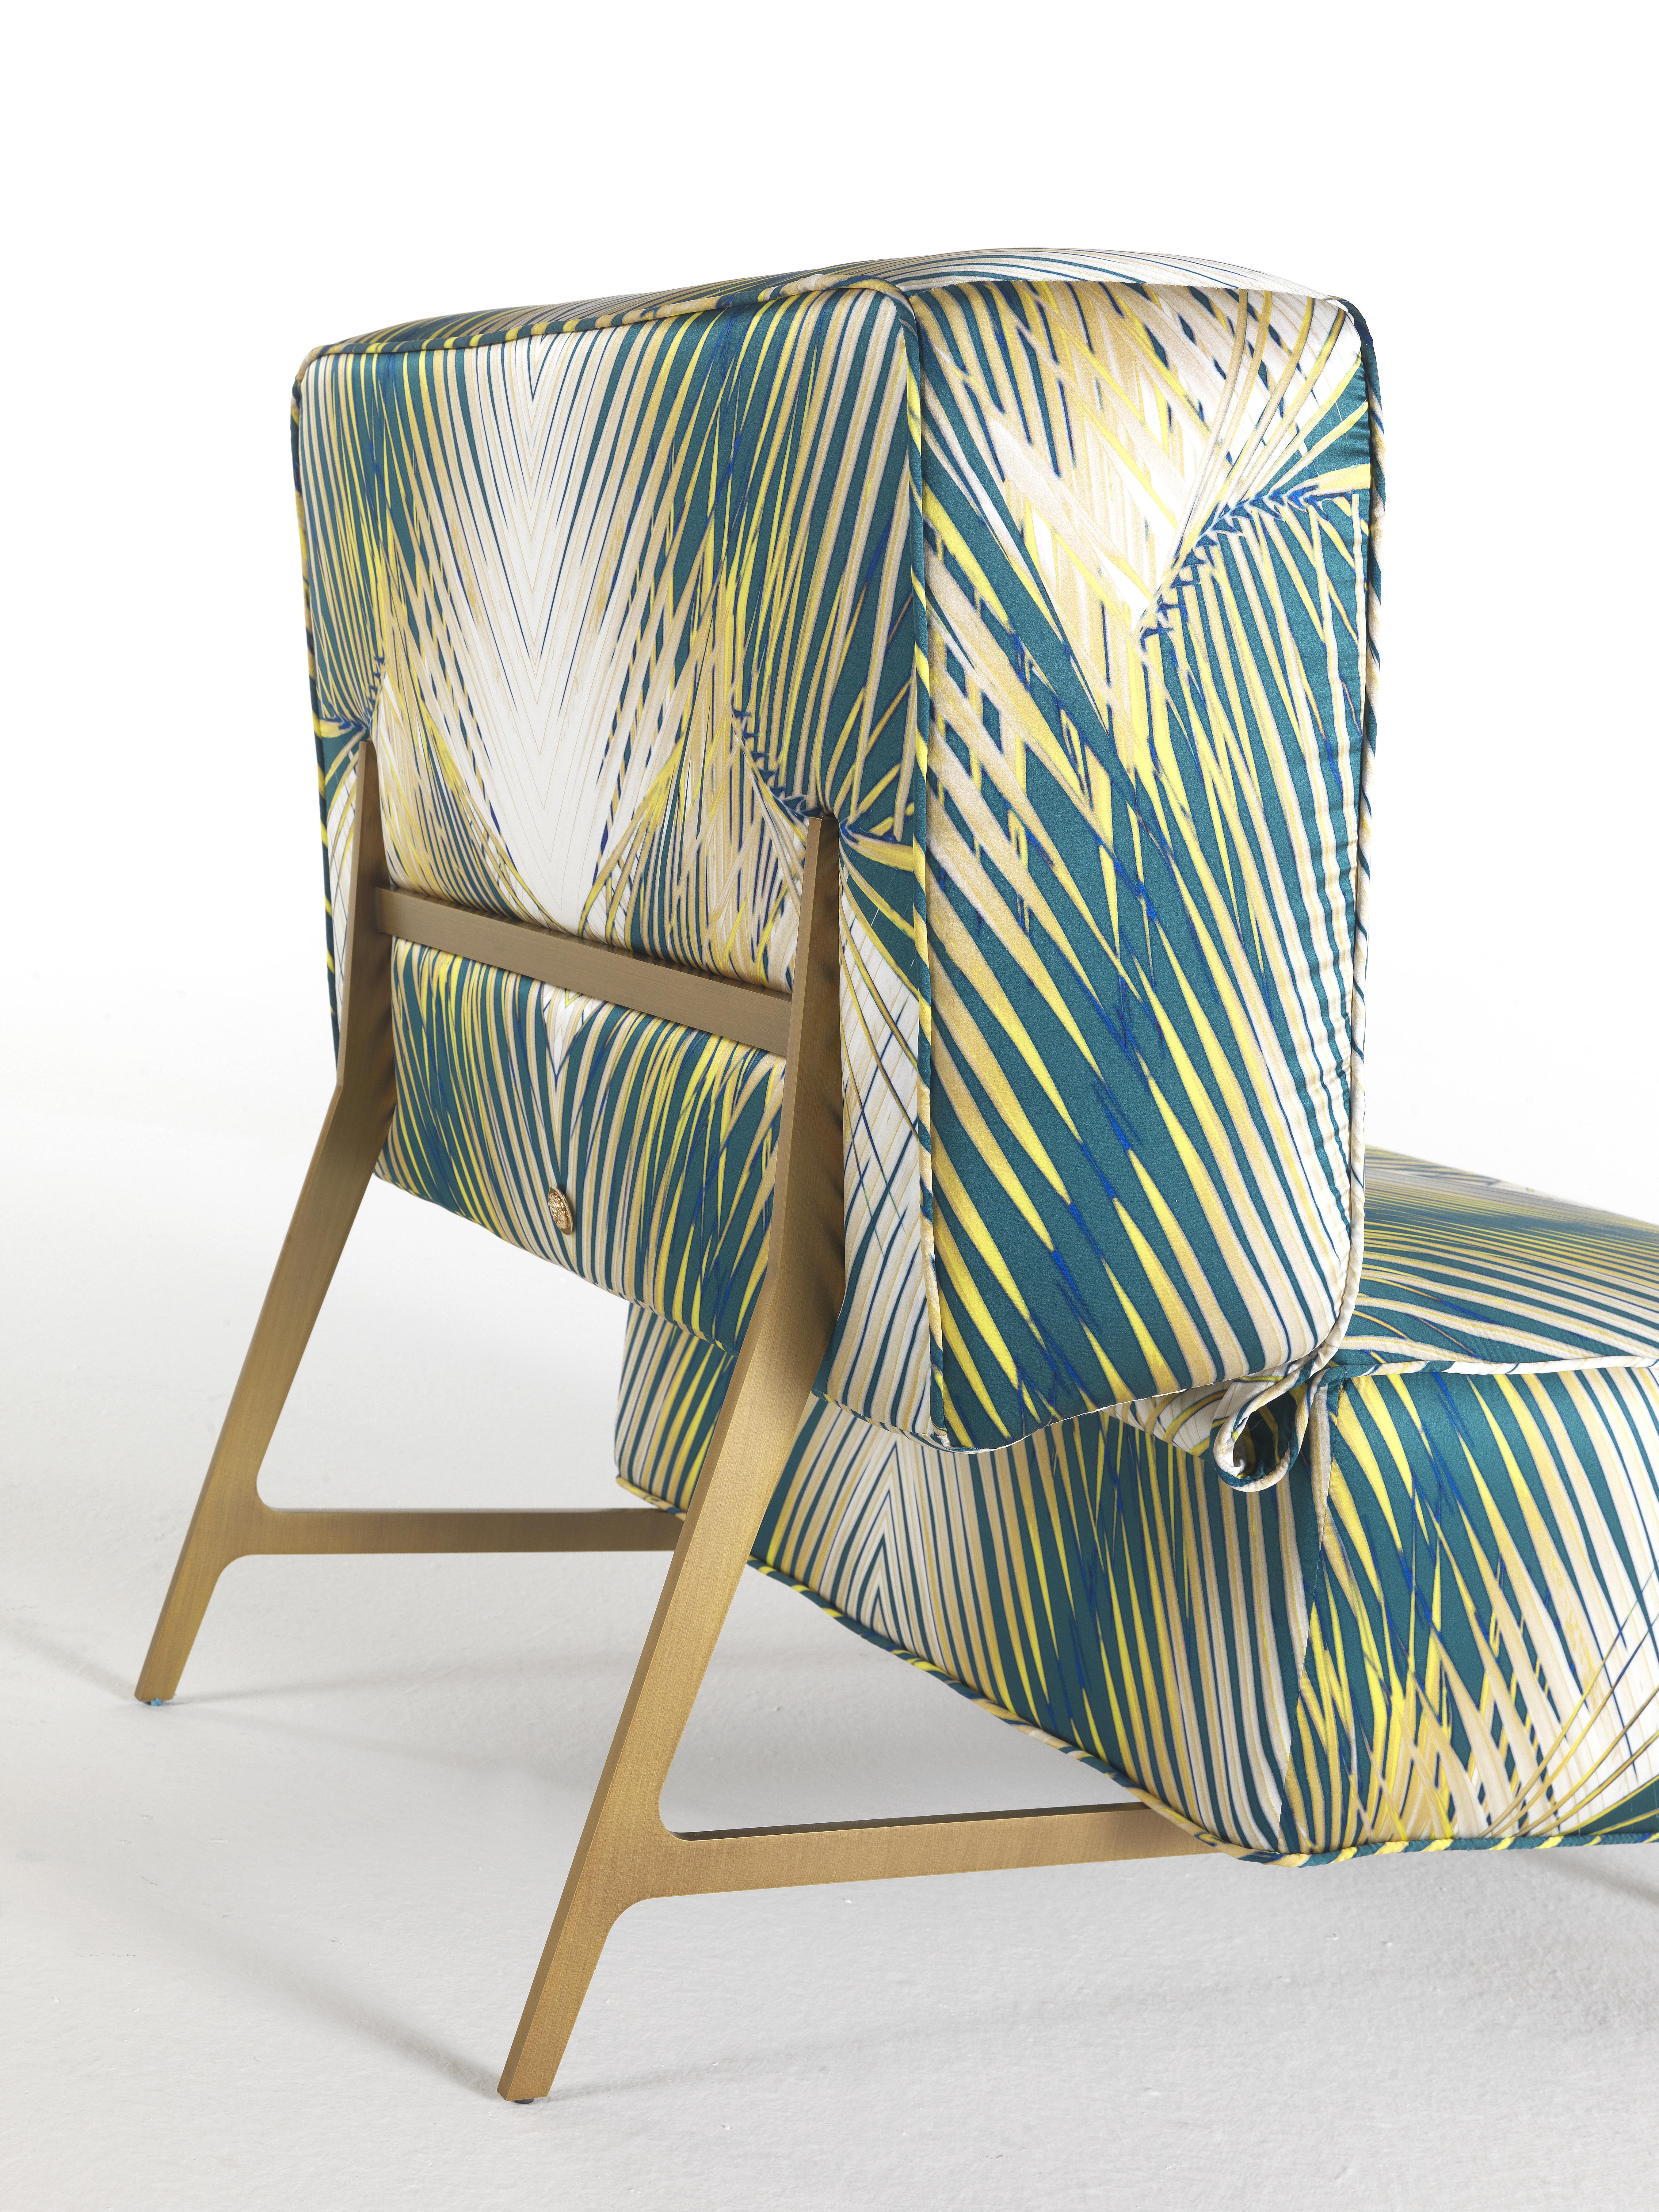 21st Century Davis Armchair in Fabric by Roberto Cavalli Home Interiors In New Condition For Sale In Cantù, Lombardia